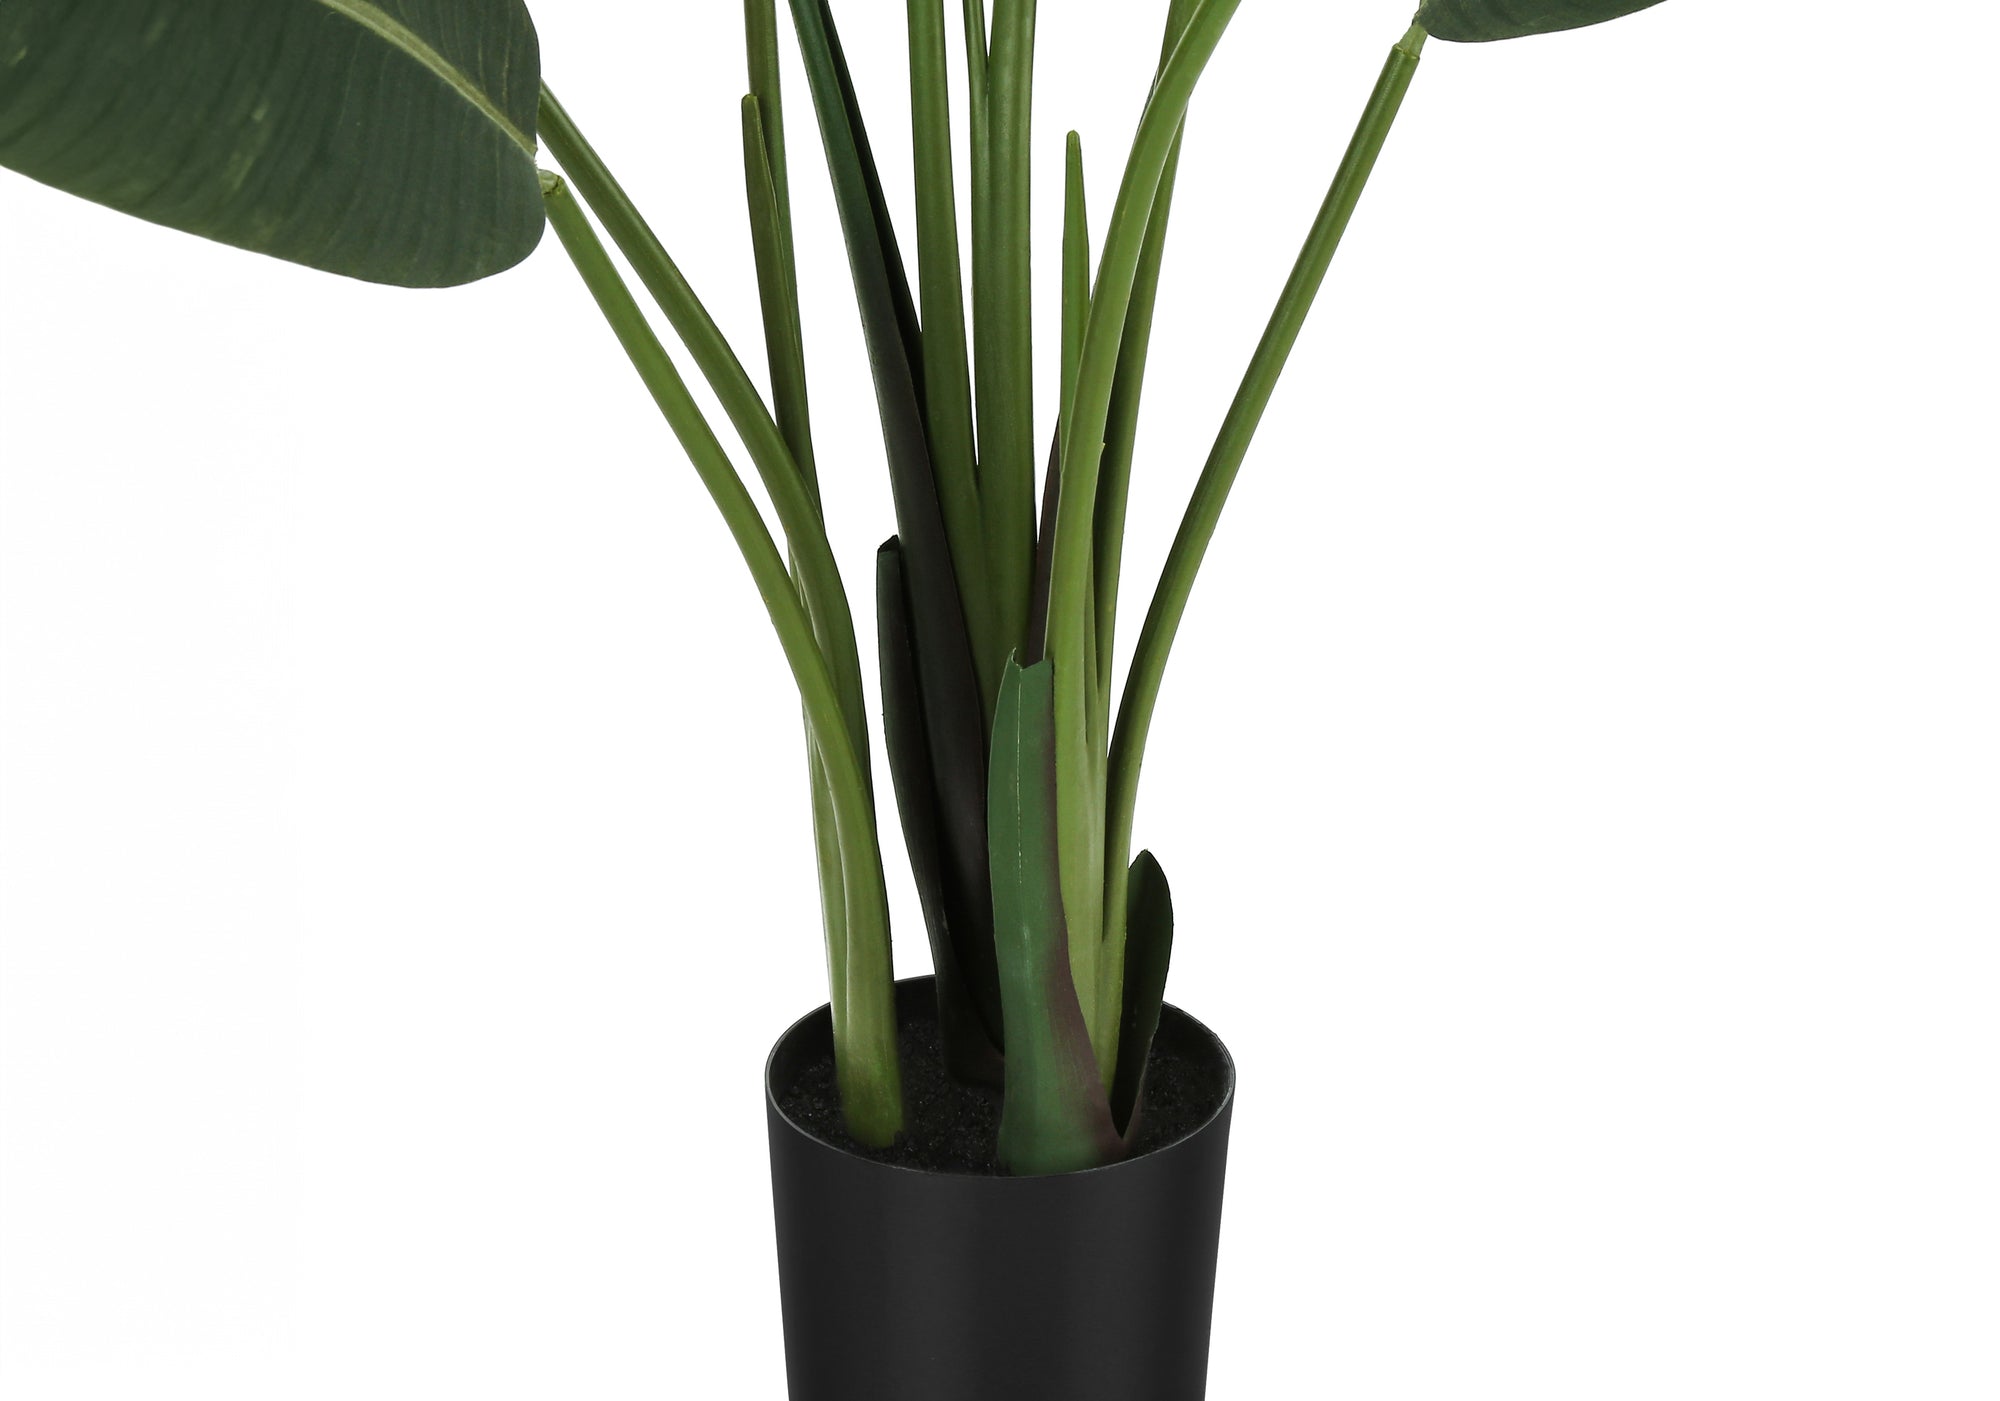 MN-629570    Artificial Plant, 60" Tall, Bird Of Paradise Tree, Indoor, Faux, Fake, Floor, Greenery, Potted, Decorative, Green Leaves, Black Pot